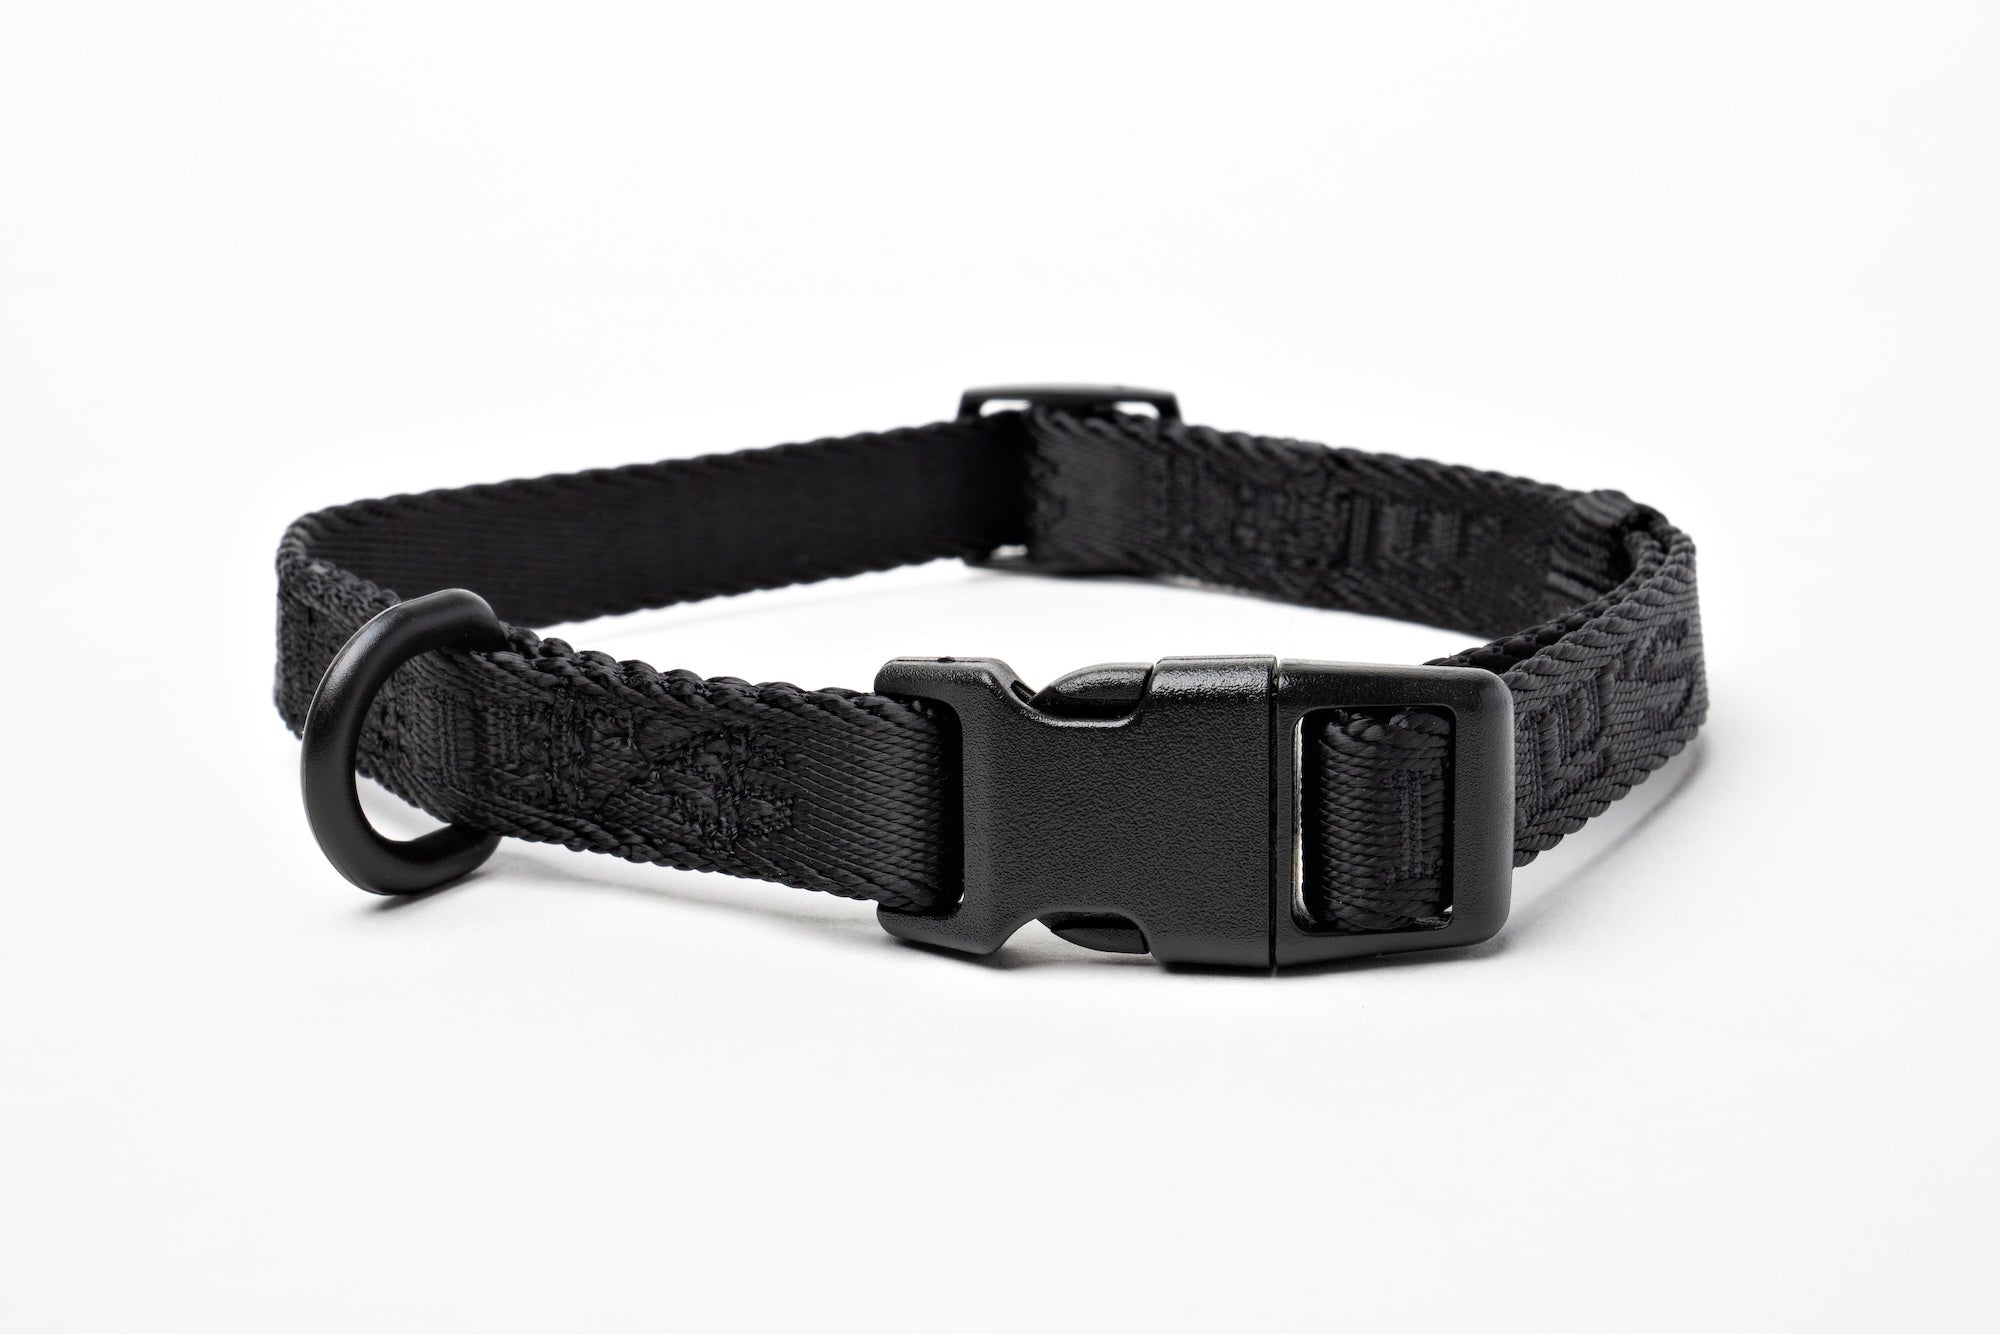 Close-up of Lulu's Midnight Black adjustable collar, showcasing its durable construction, secure buckle, and sleek design